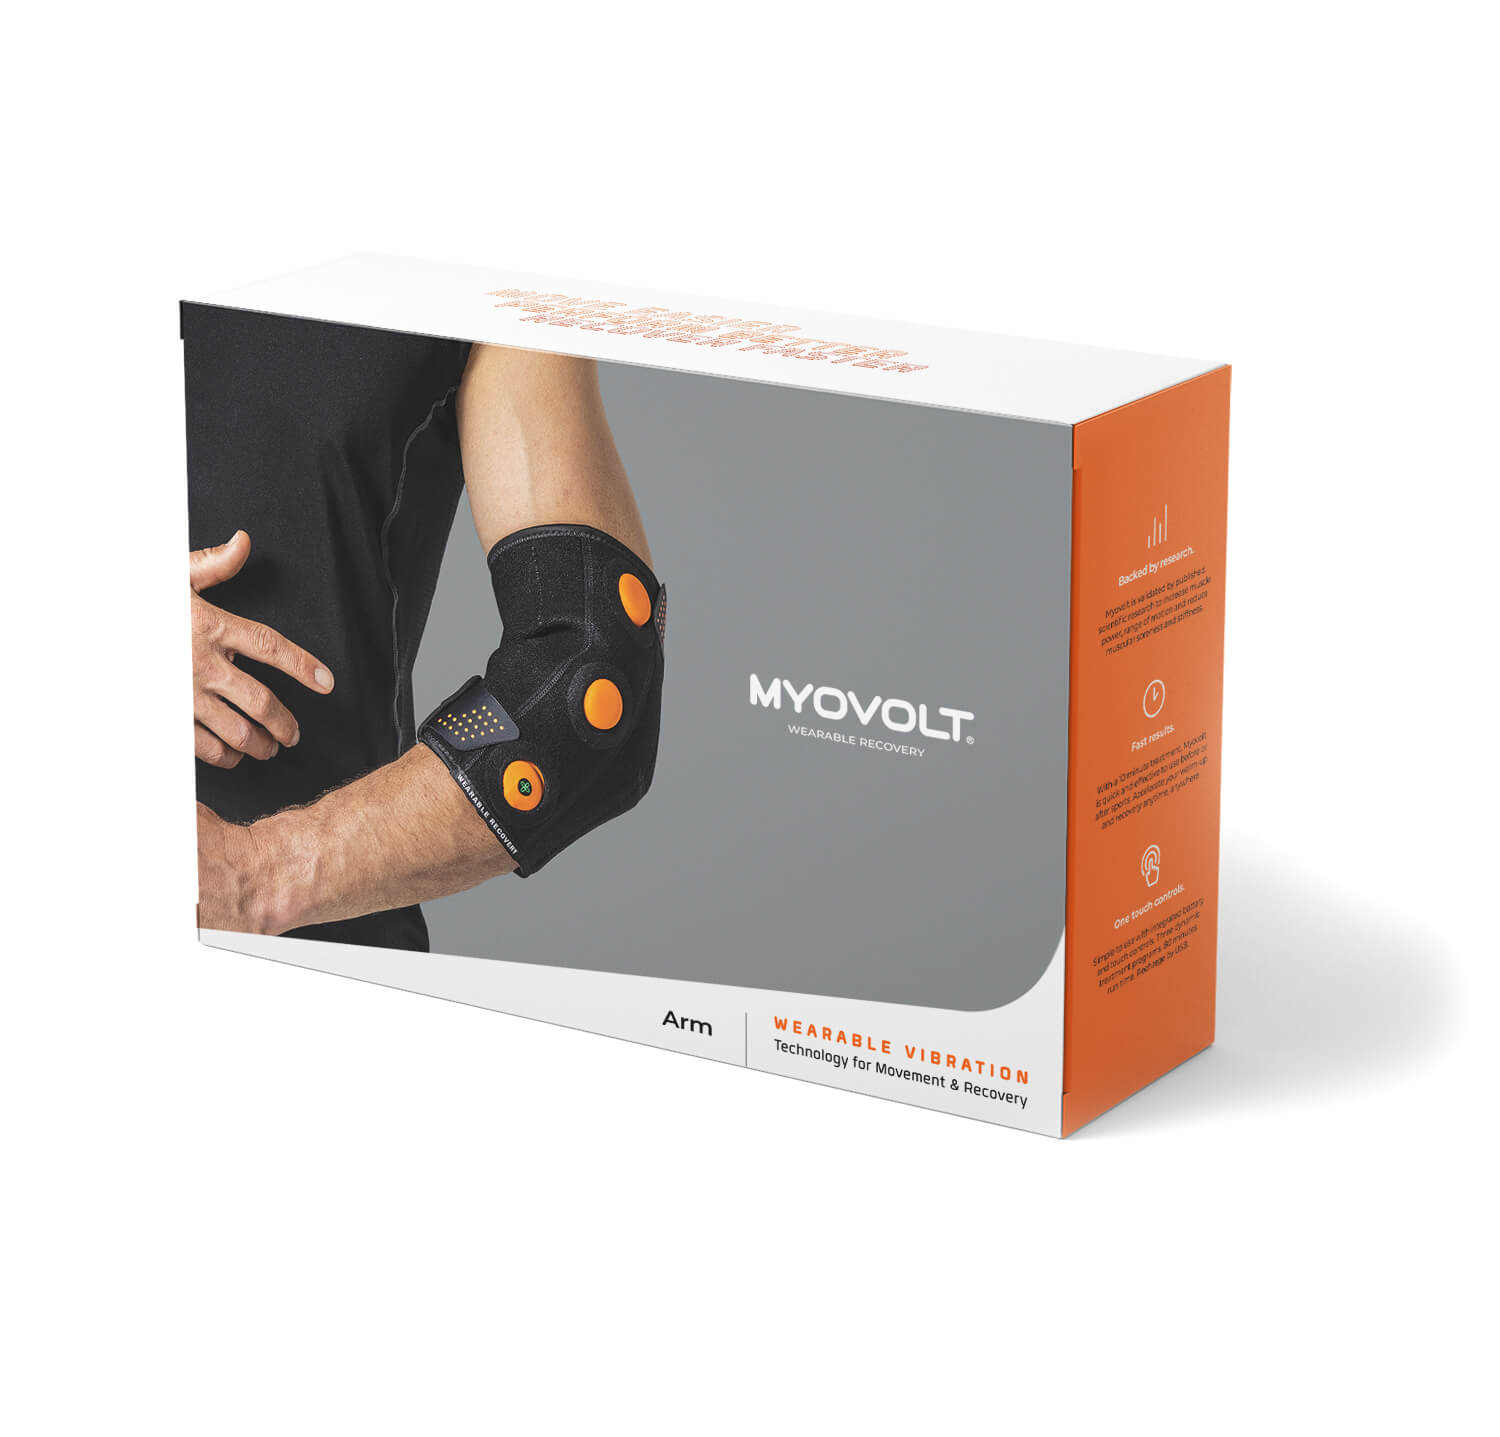 A stack of two Myovolt Arm wearable vibration device product boxes.